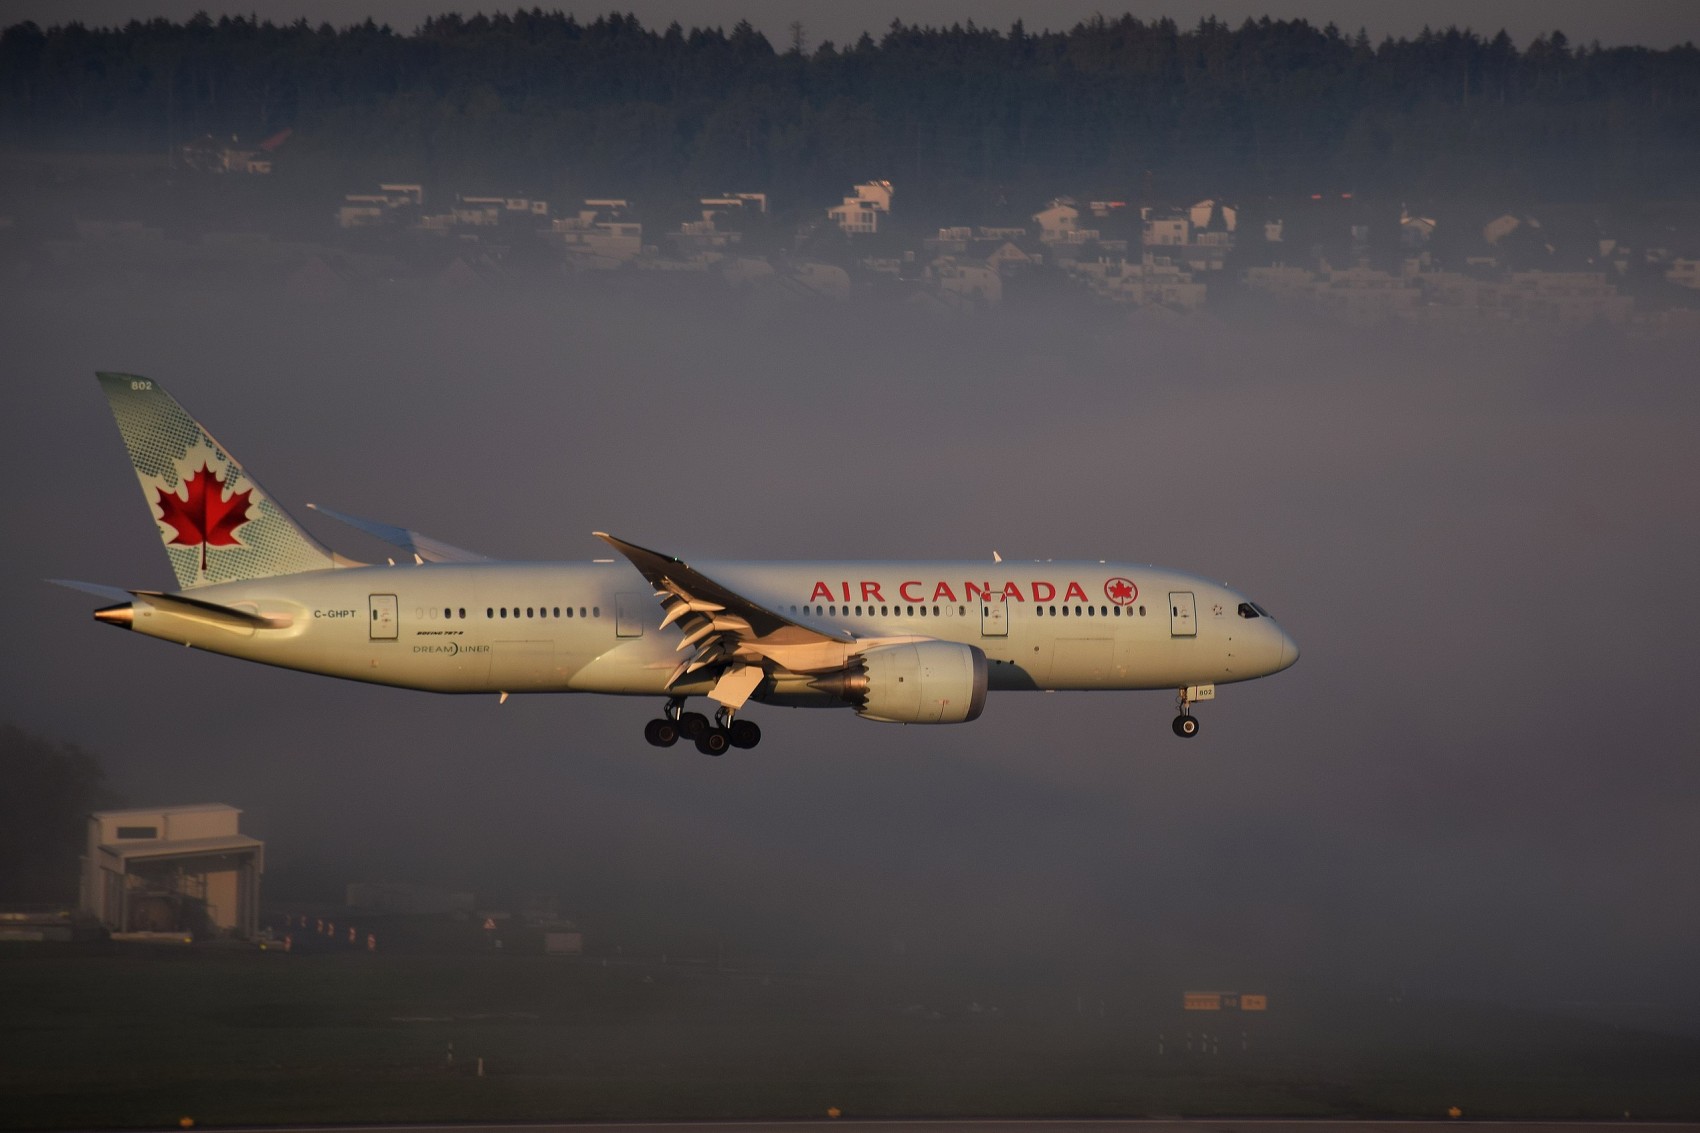 air canada plane landing in zurich airport with morning fog